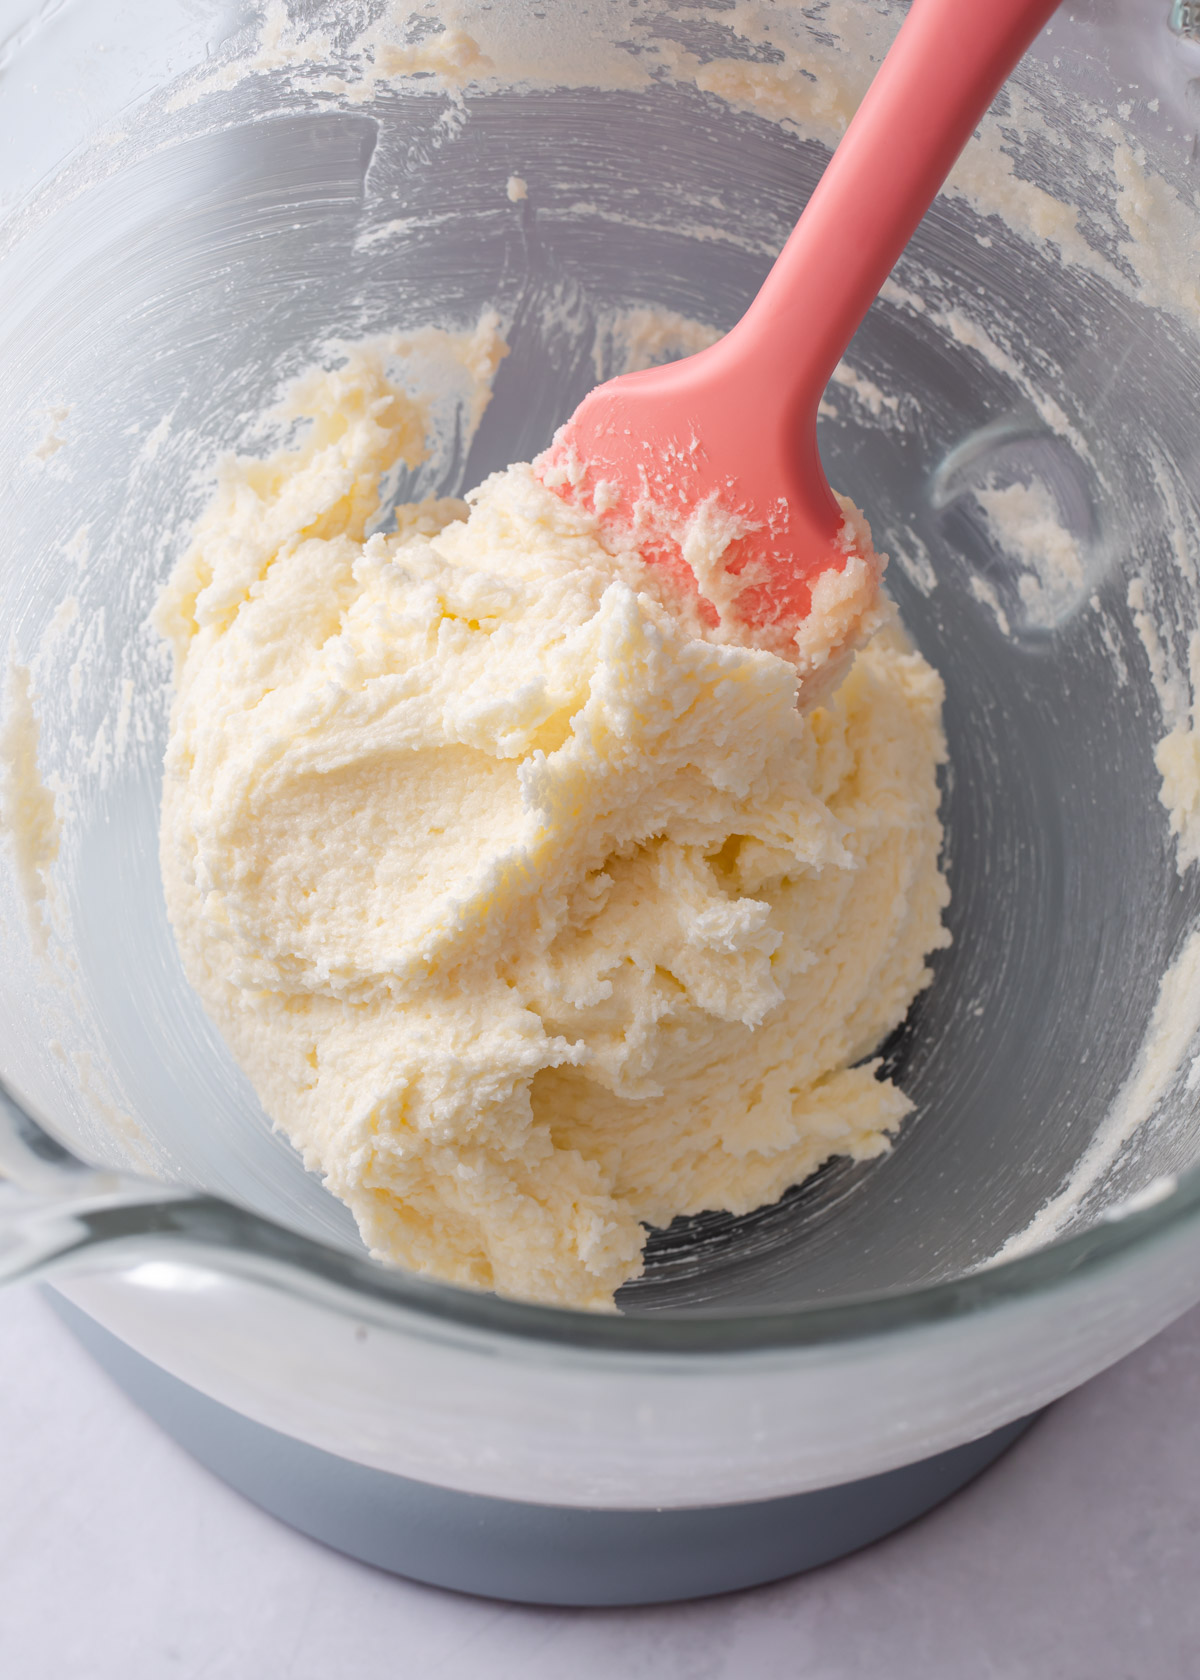 Properly creamed butter and sugar for cake